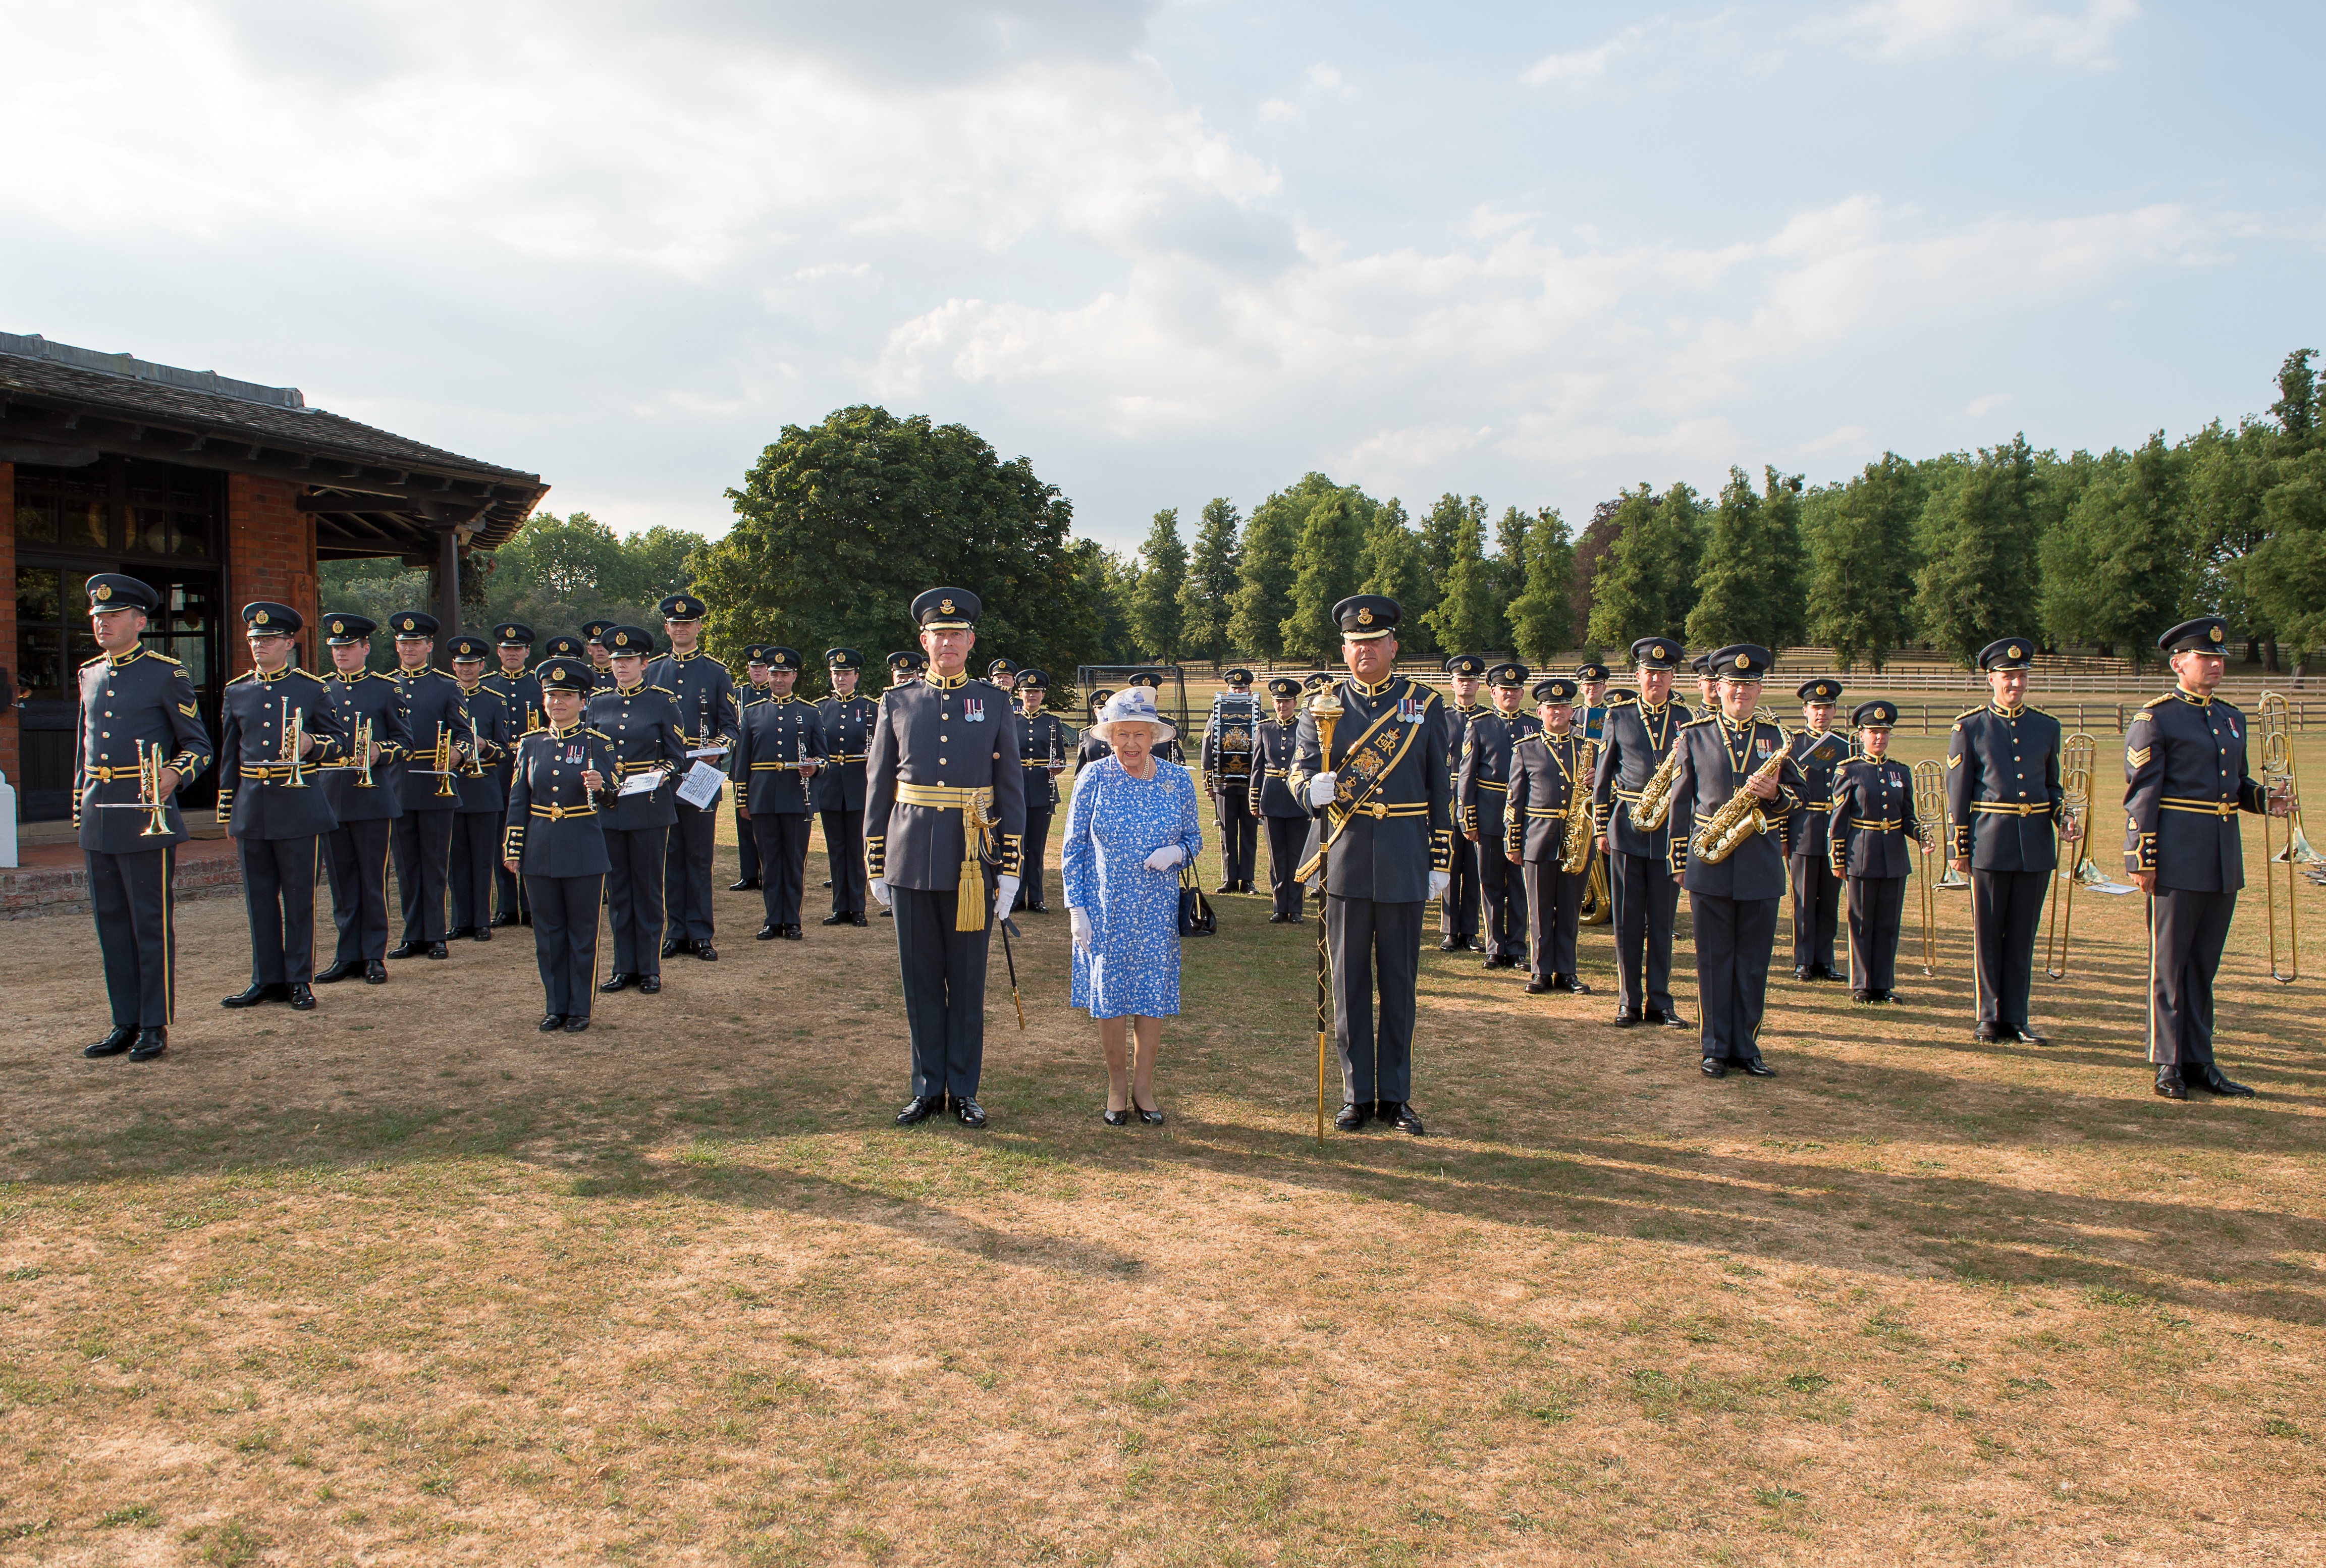 Wing Commander Piers Morrell OBE MVO pictured with Her Majesty The Queen and the Central Band of the RAF.